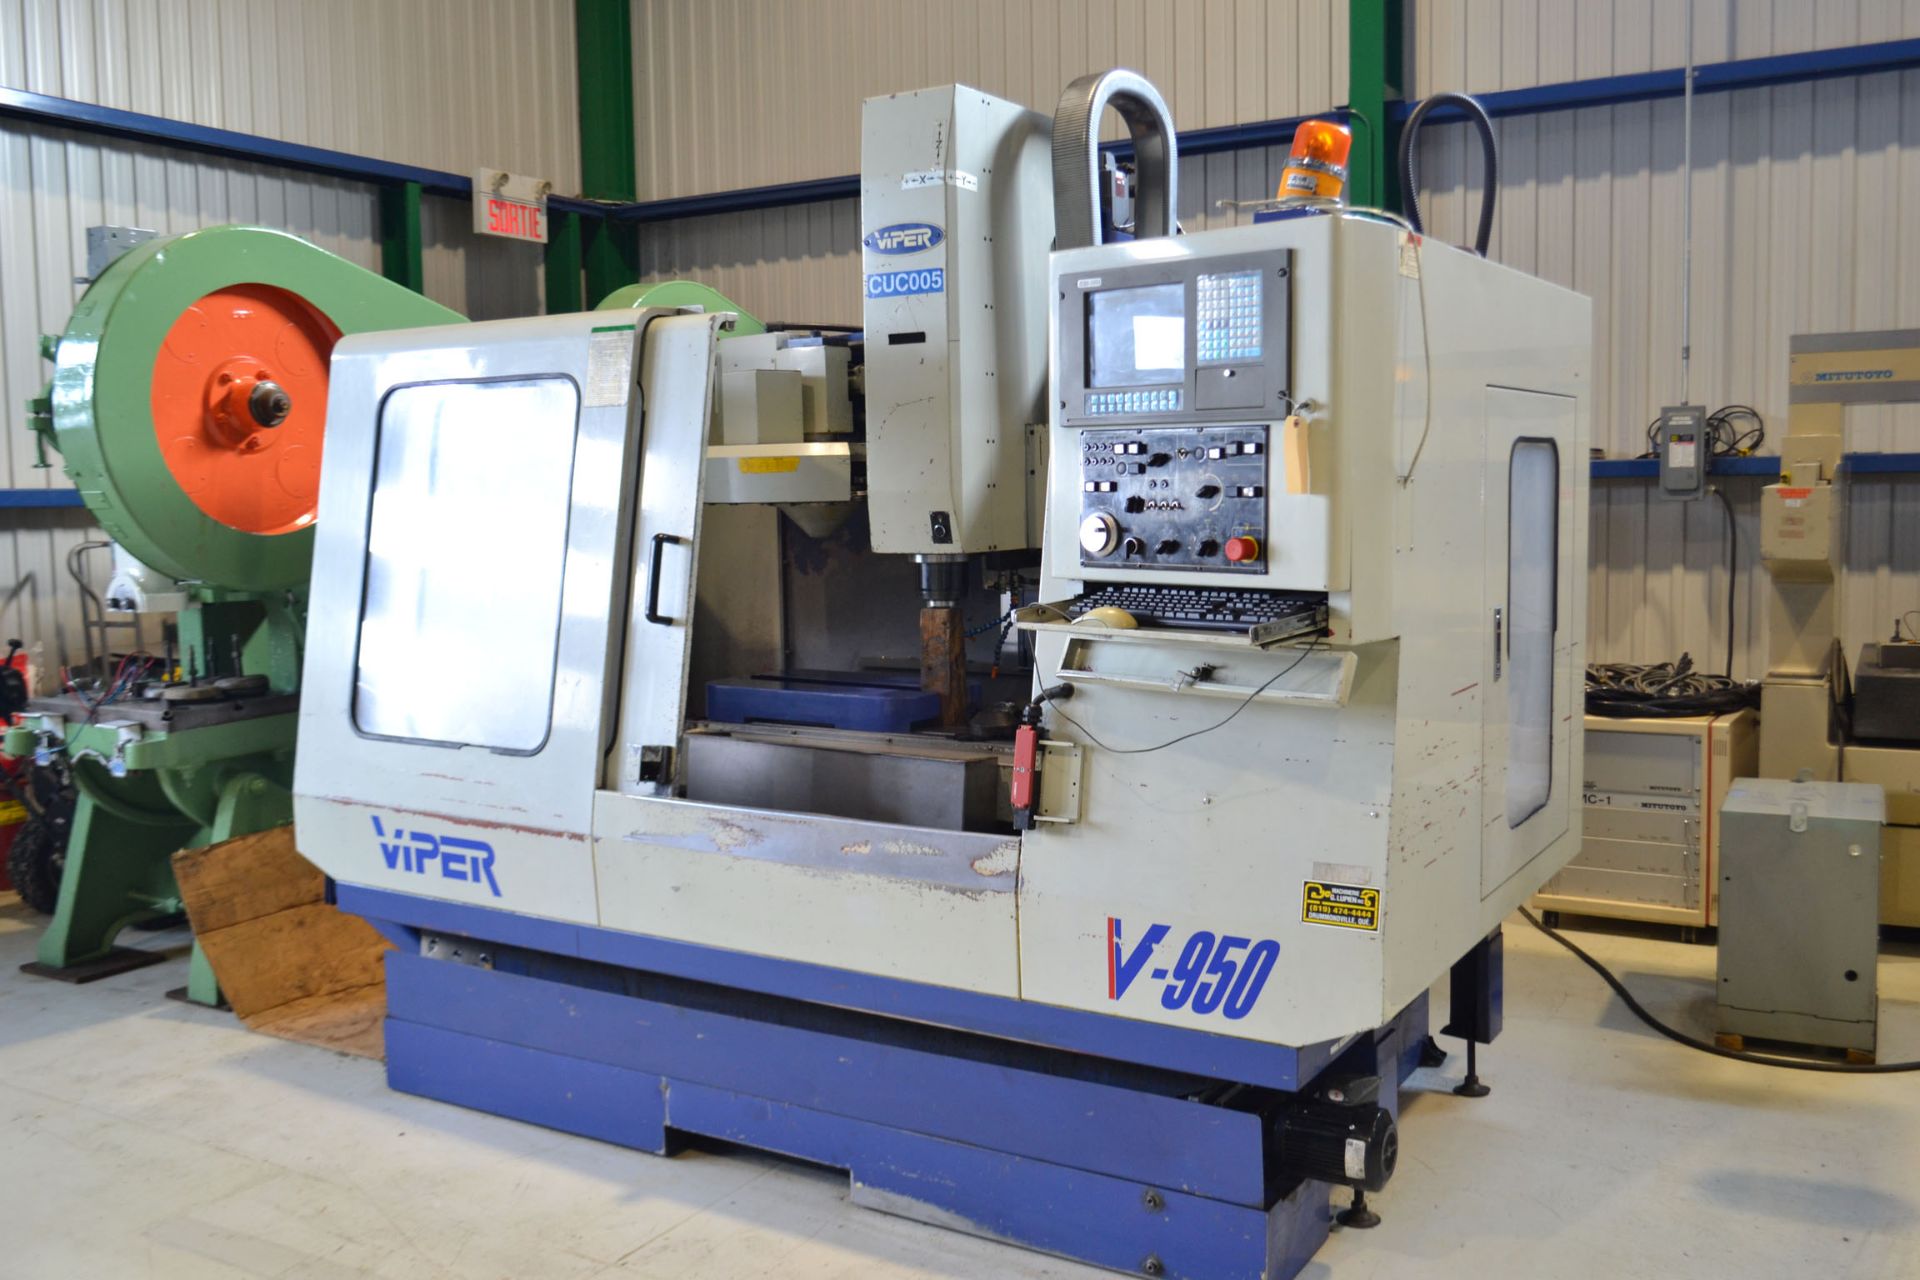 MIGHTY VIPER V950 3-AXIS VERTICAL MACHINING CENTER - LOCATION: MONTREAL, QUEBEC - Image 2 of 5